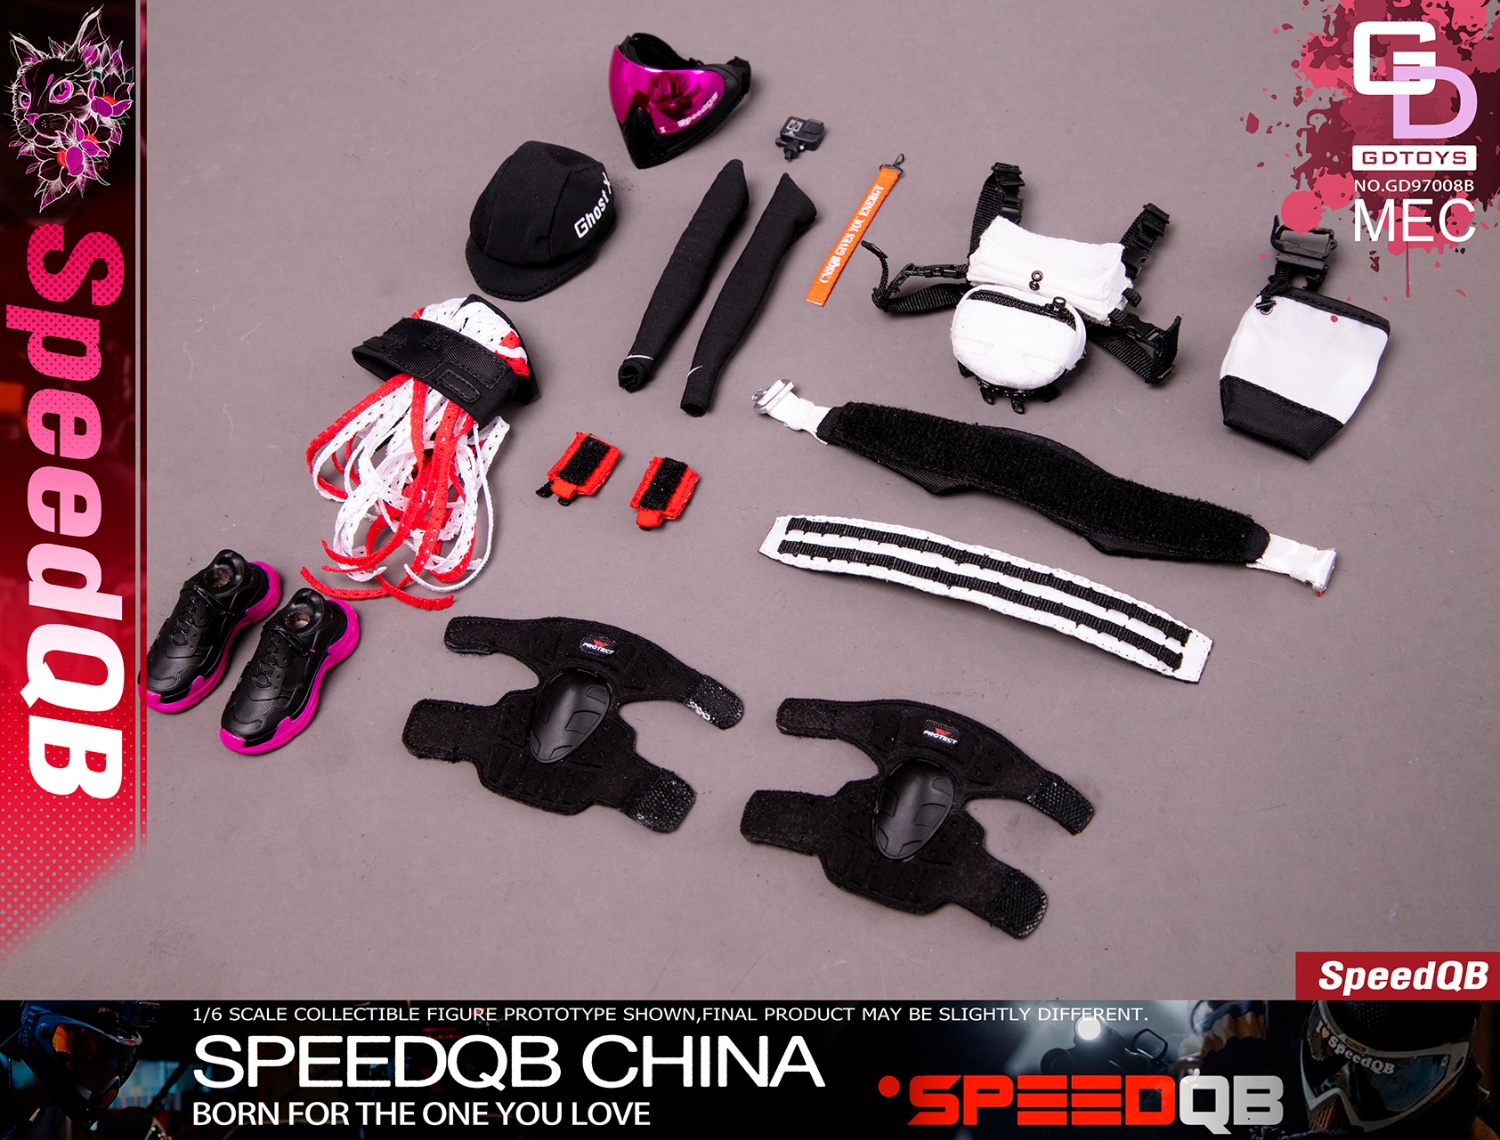 NEW PRODUCT: SpeedQB - Competitive Sports Charge Girl (GD97008B) 2438